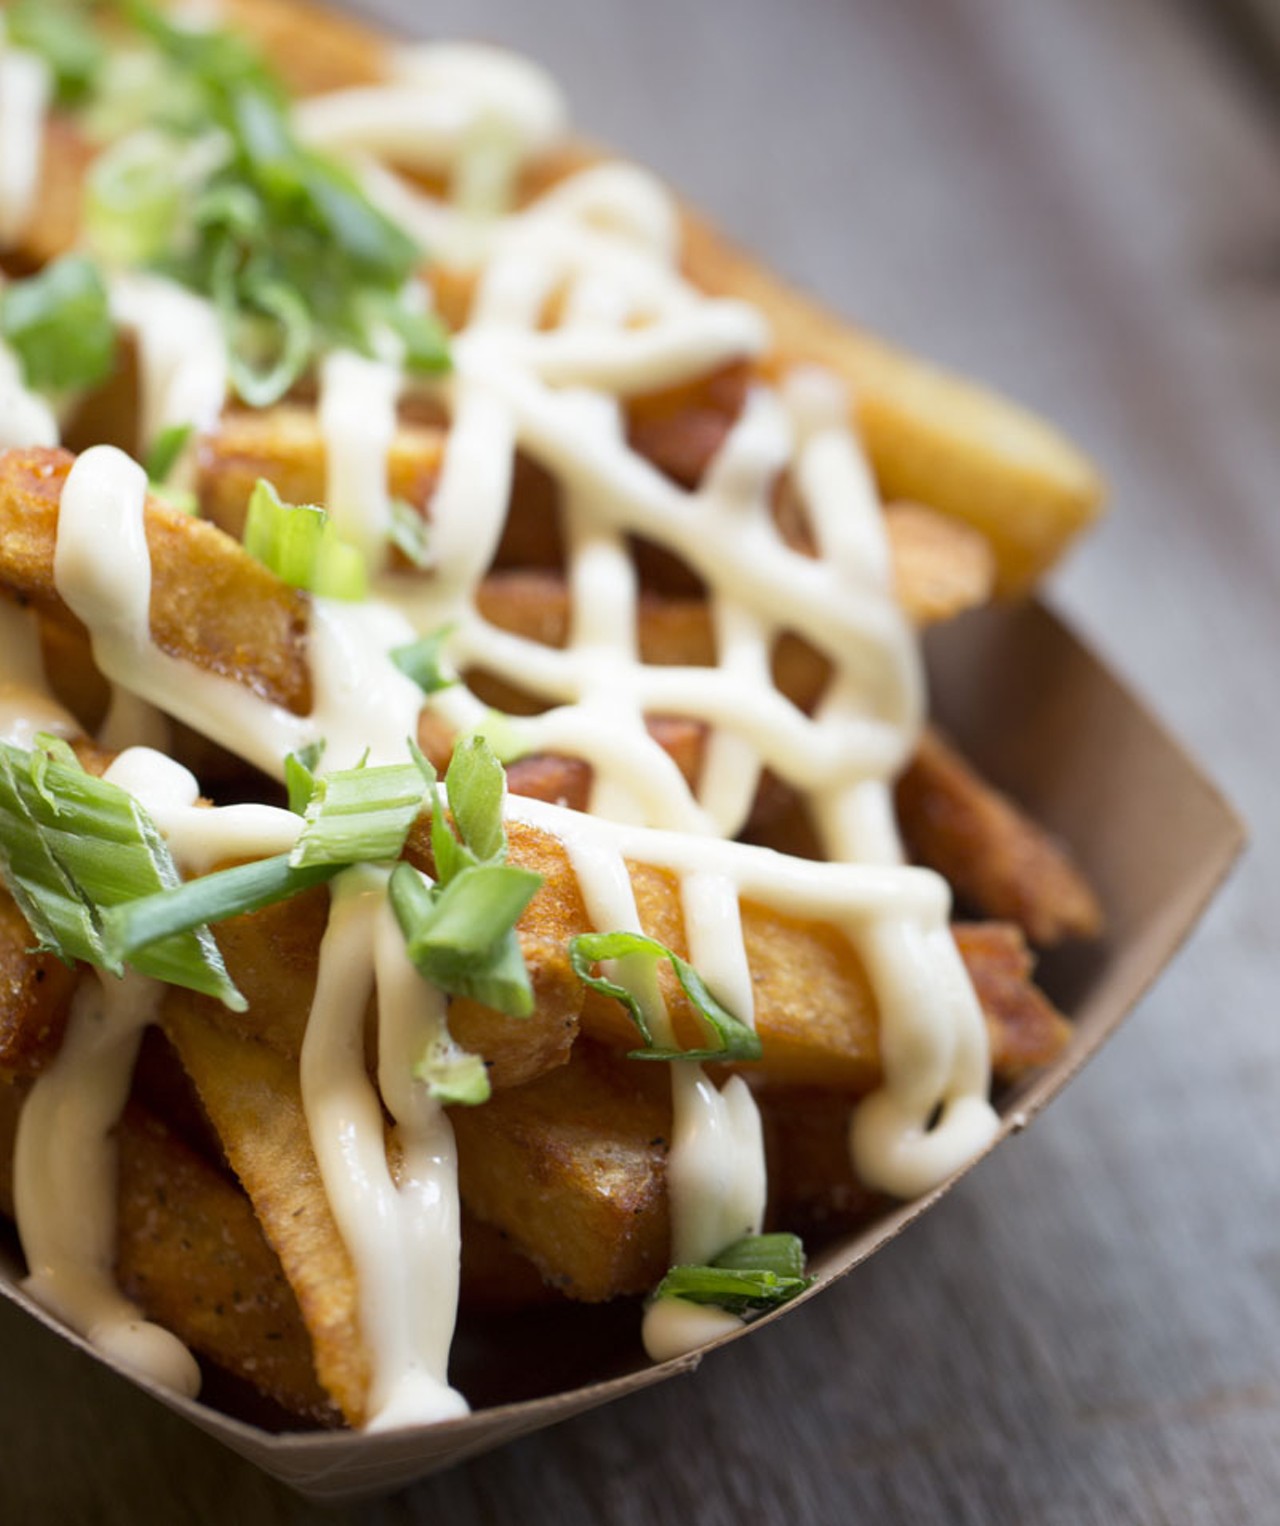 "Double Dutch Fries" are served with with garlic mayo & scallions.